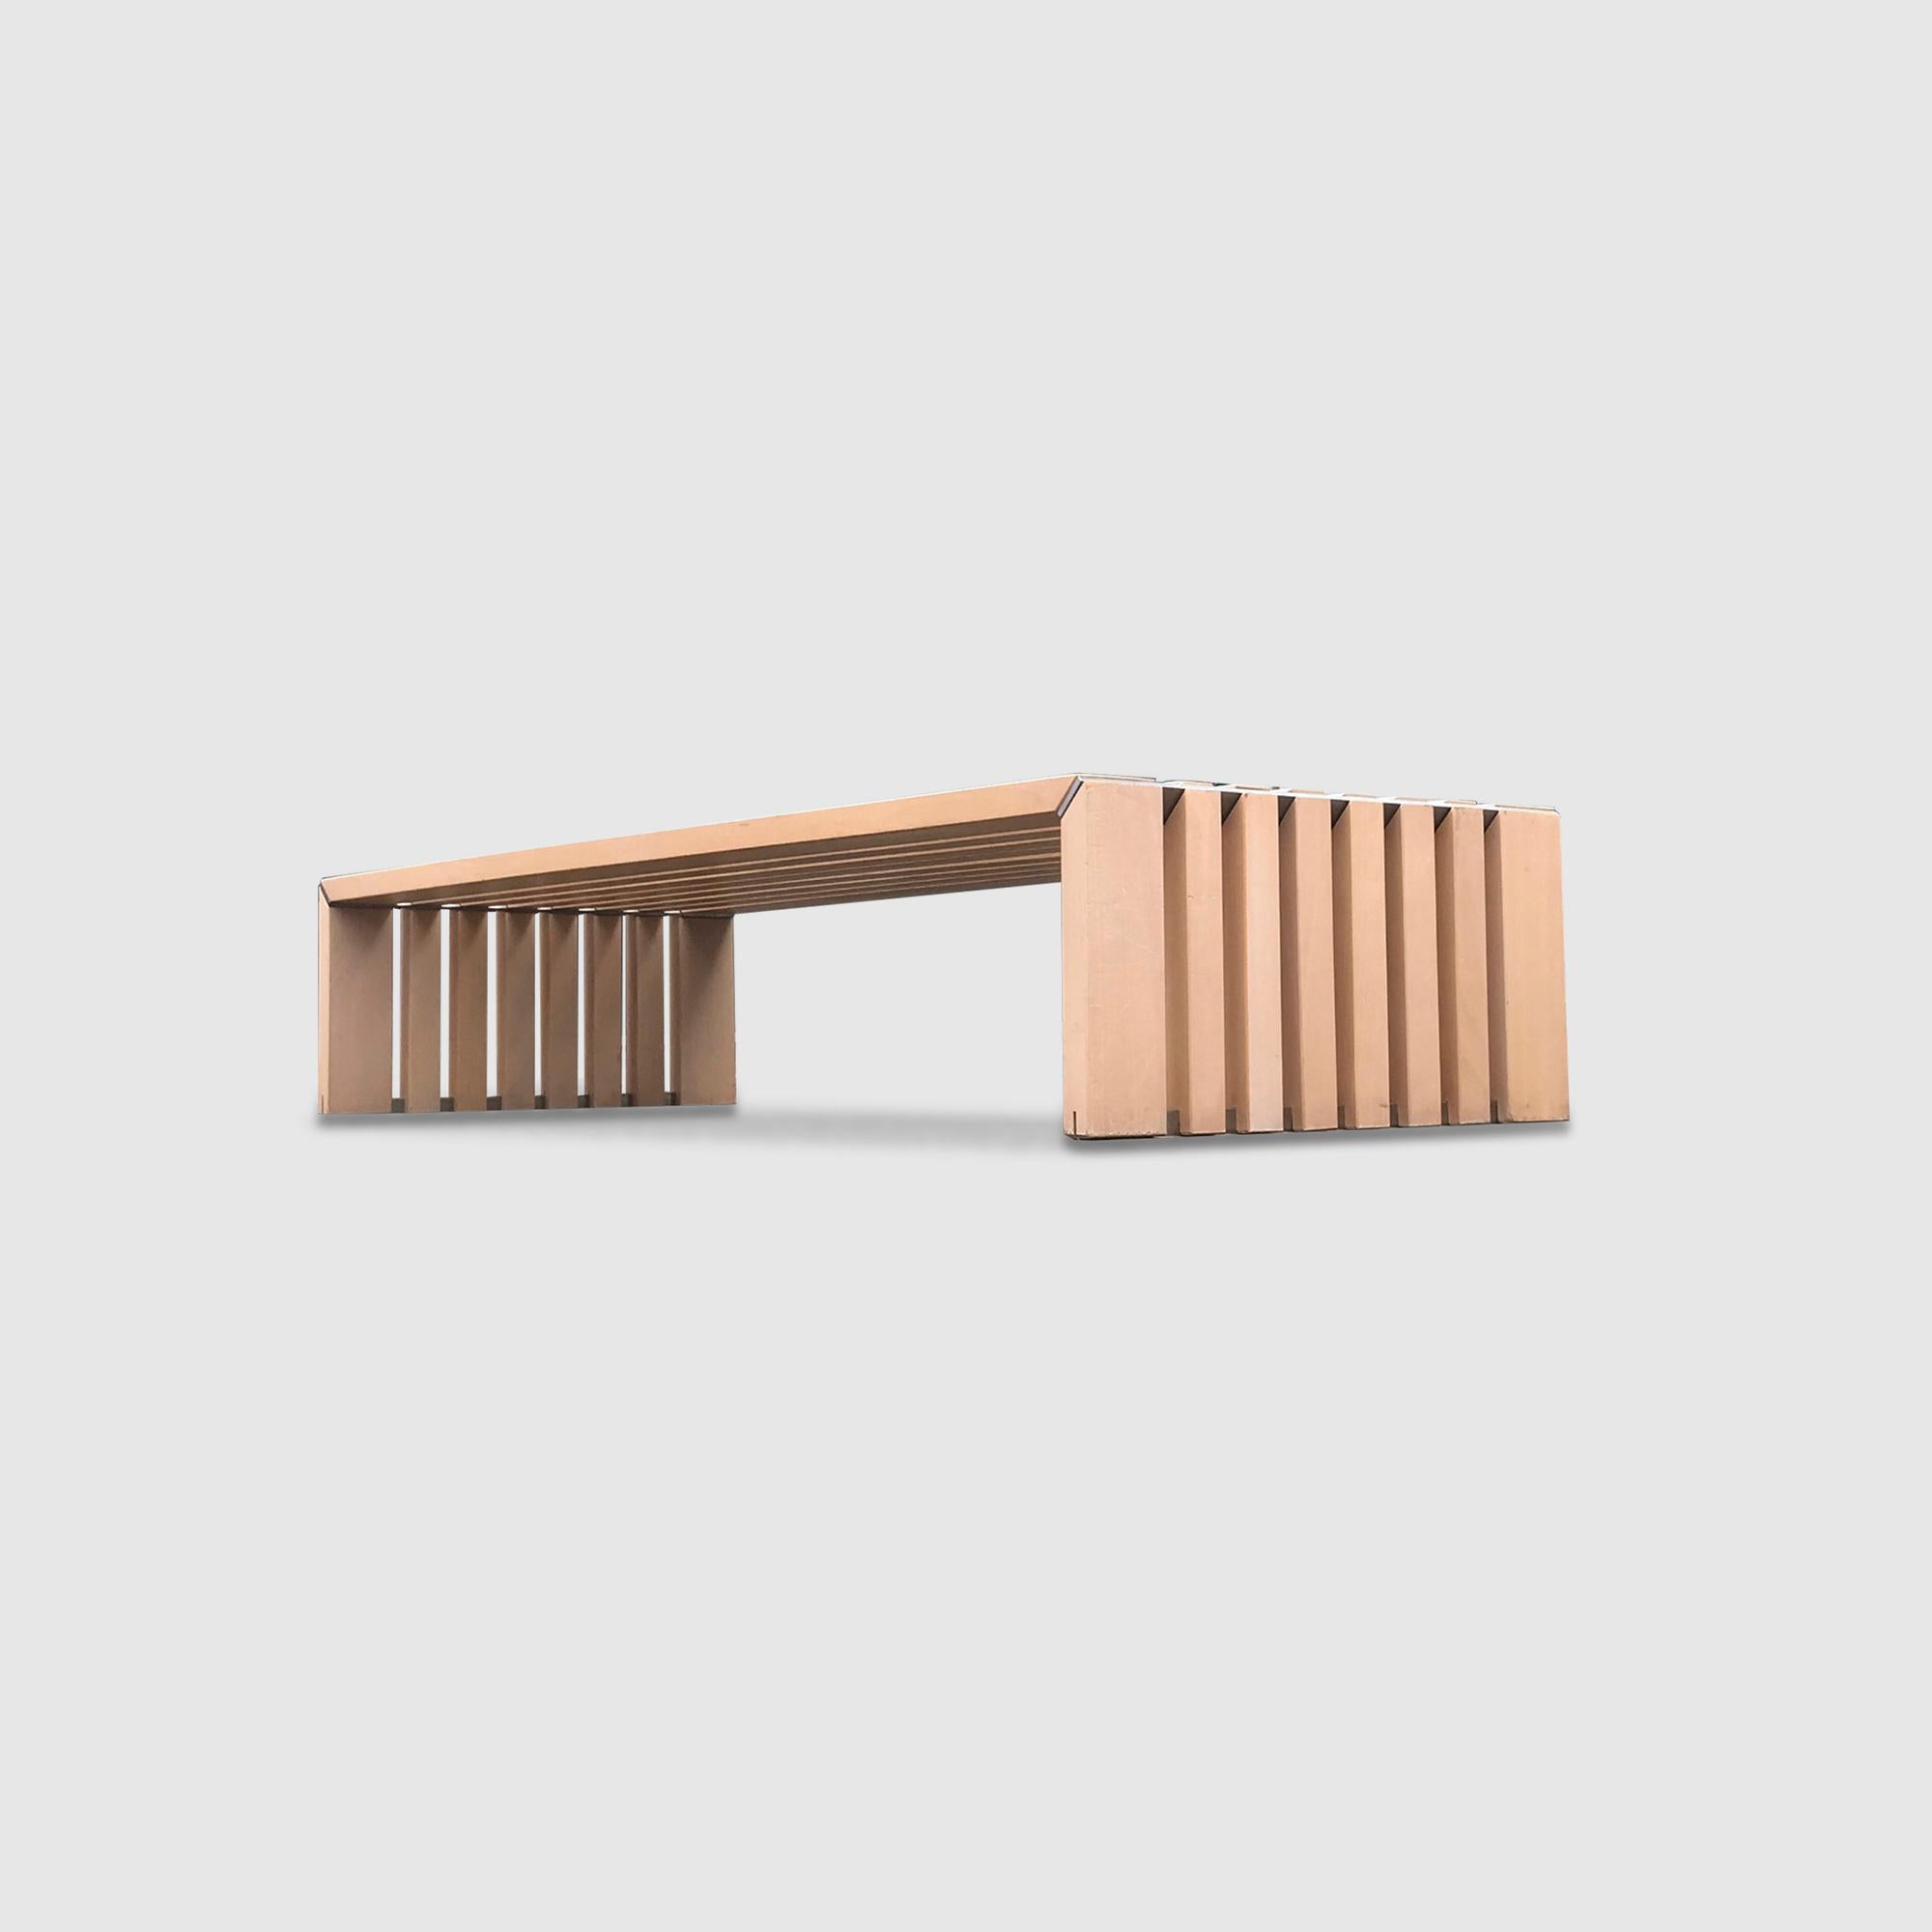 Dutch Passe Partout slatted ash bench by Walter Antonis for Arspect 1970s For Sale